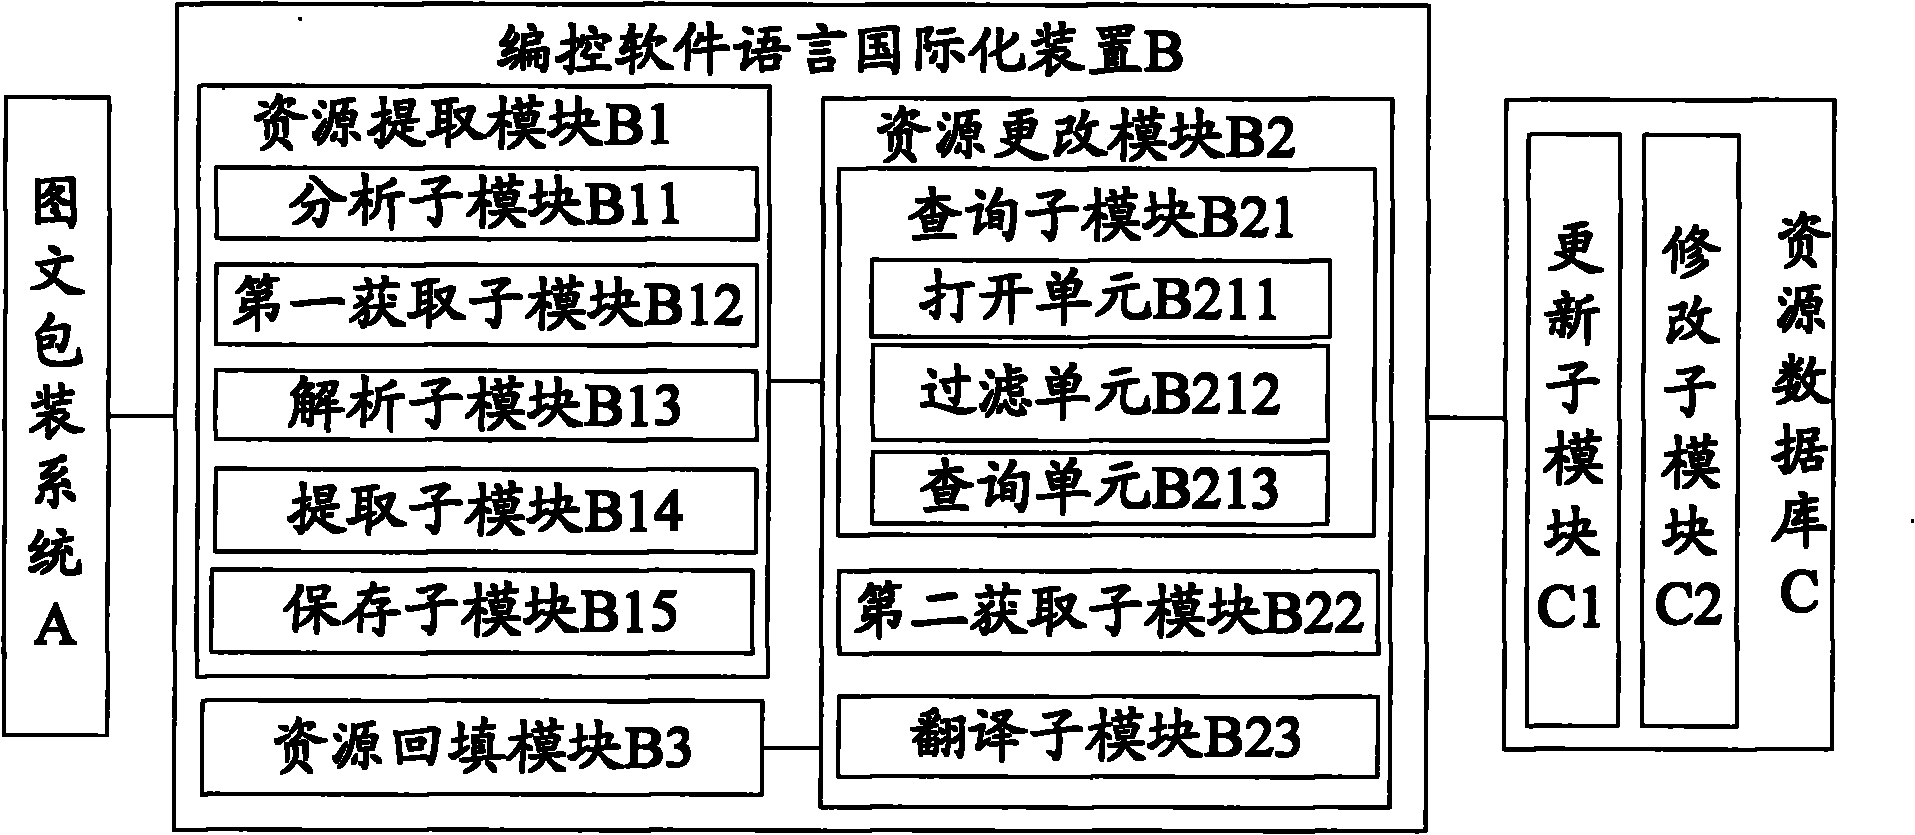 Internationalizing system of picture and text packaging programming control software